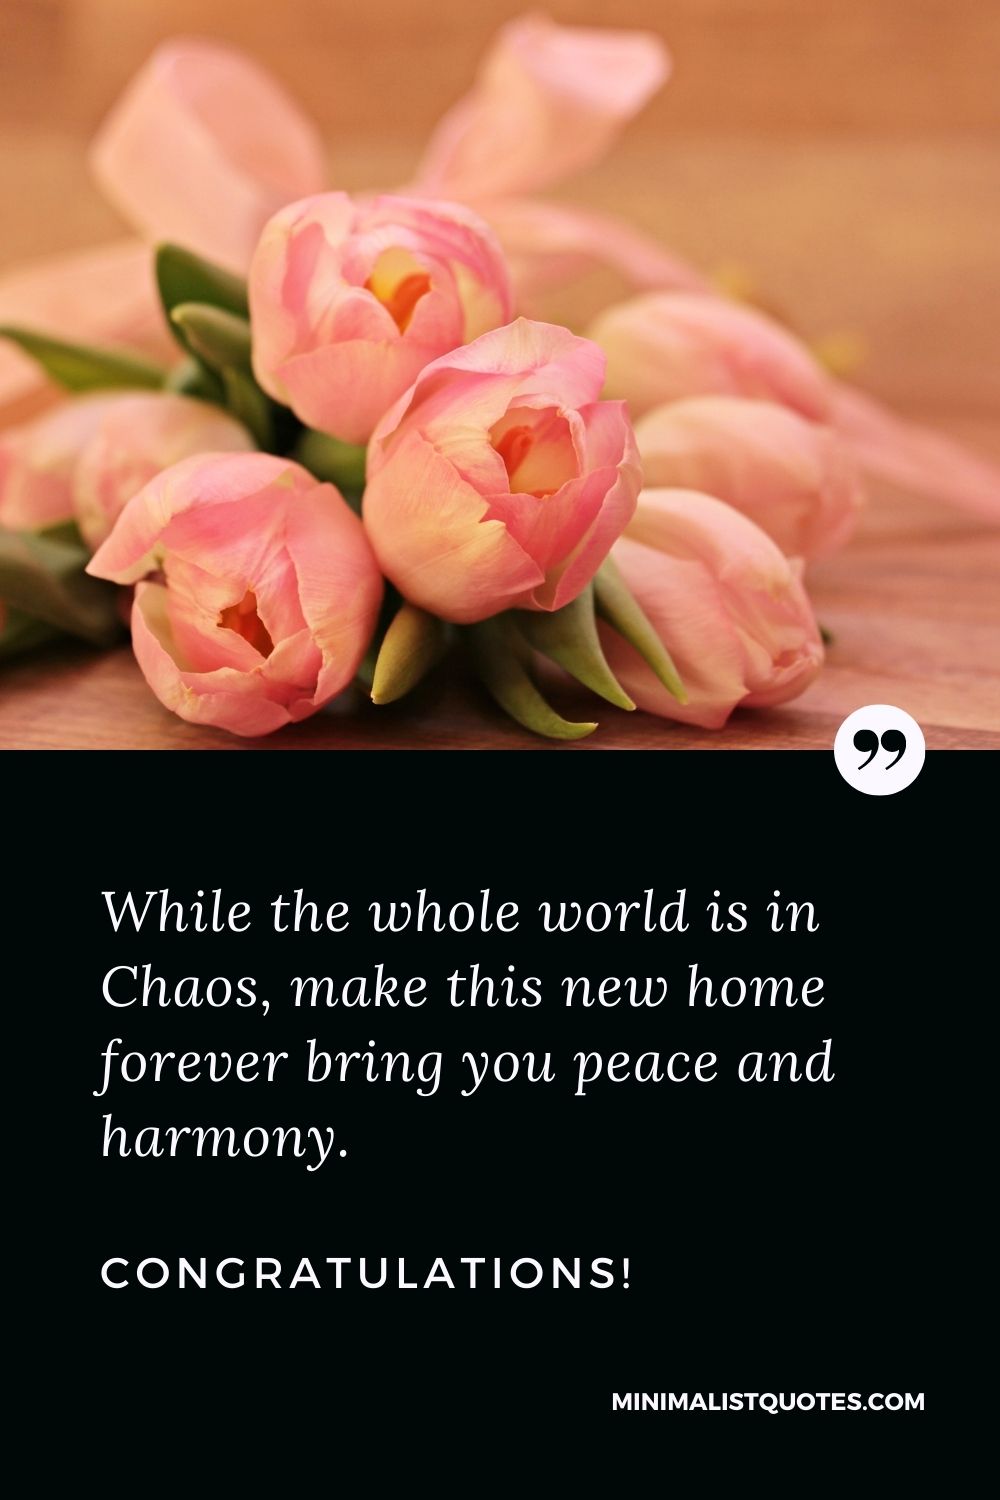 New Home Wish, Quote & Message With Image: While the whole world is in Chaos, make this new home forever bring you peace and harmony. Congratulations!